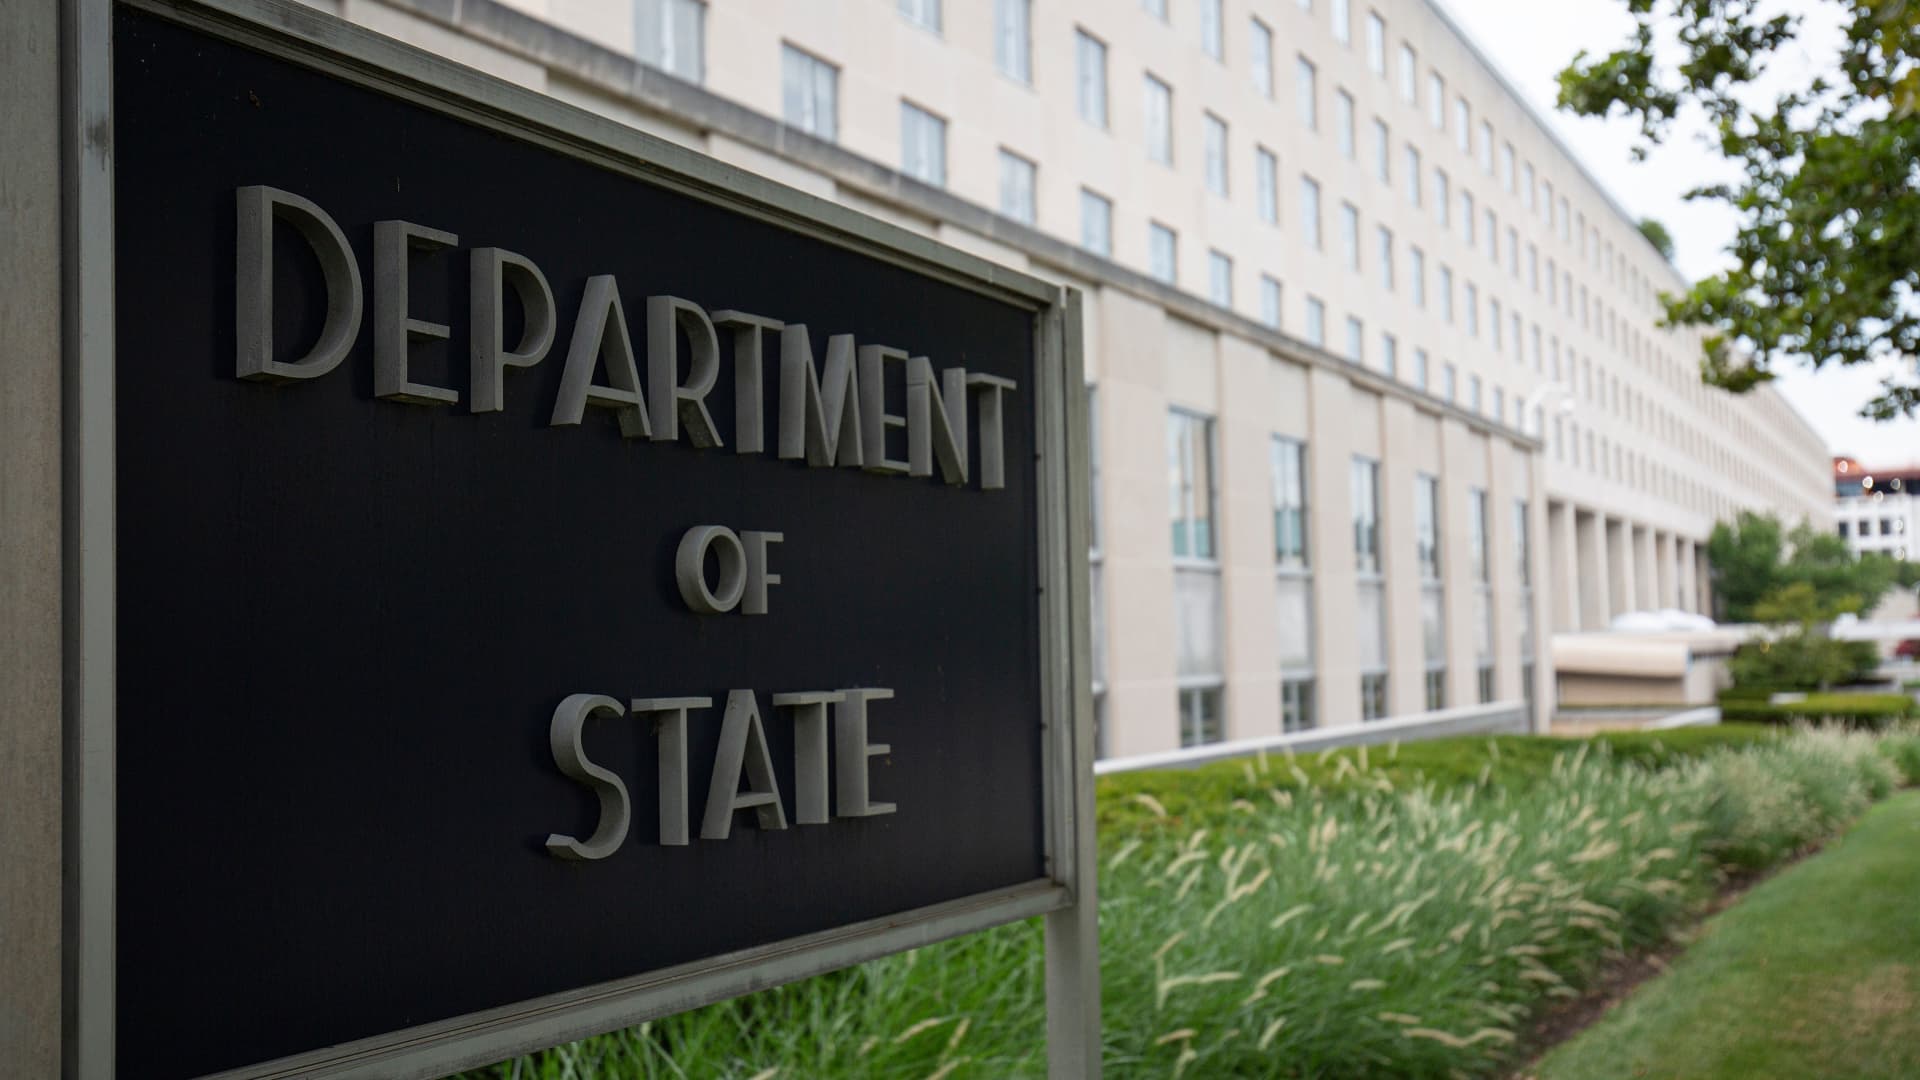 The U.S. Department of State building is seen in Washington, D.C., on July 22, 2019.